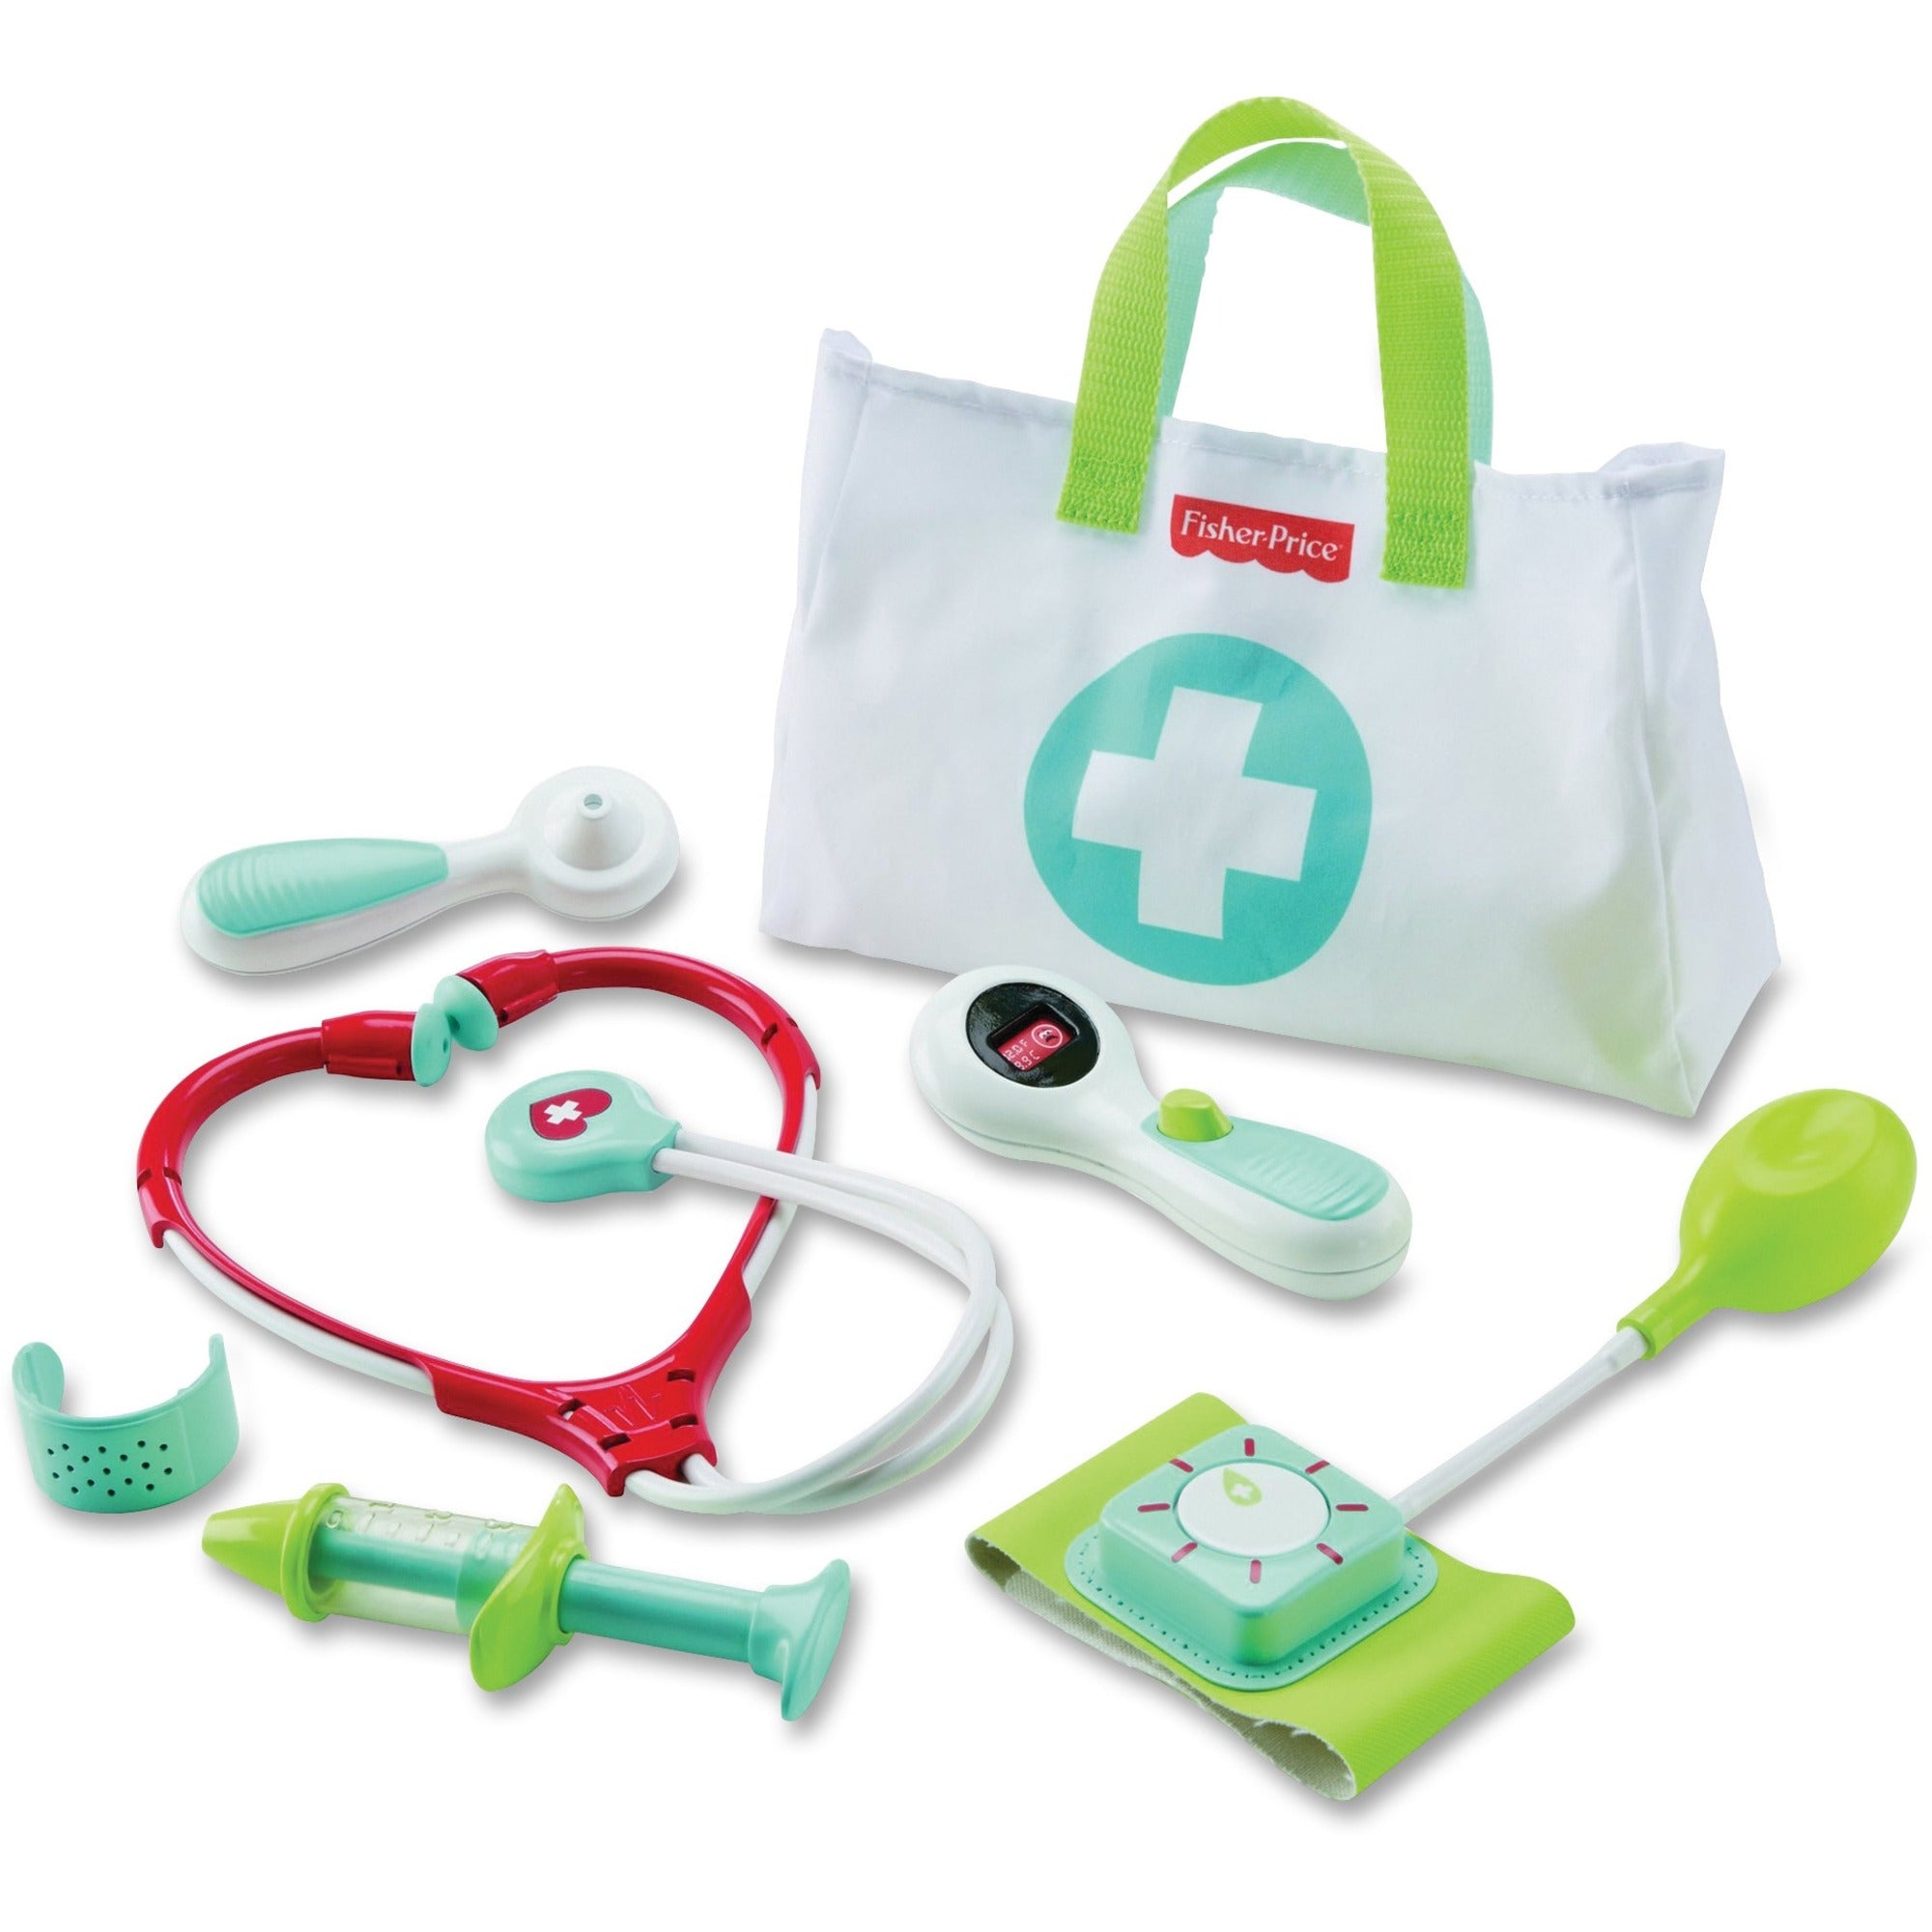 fisher-price-plastic-play-medical-kit-1-each-3-year-to-6-year-multi-plastic_fipdvh14 - 1